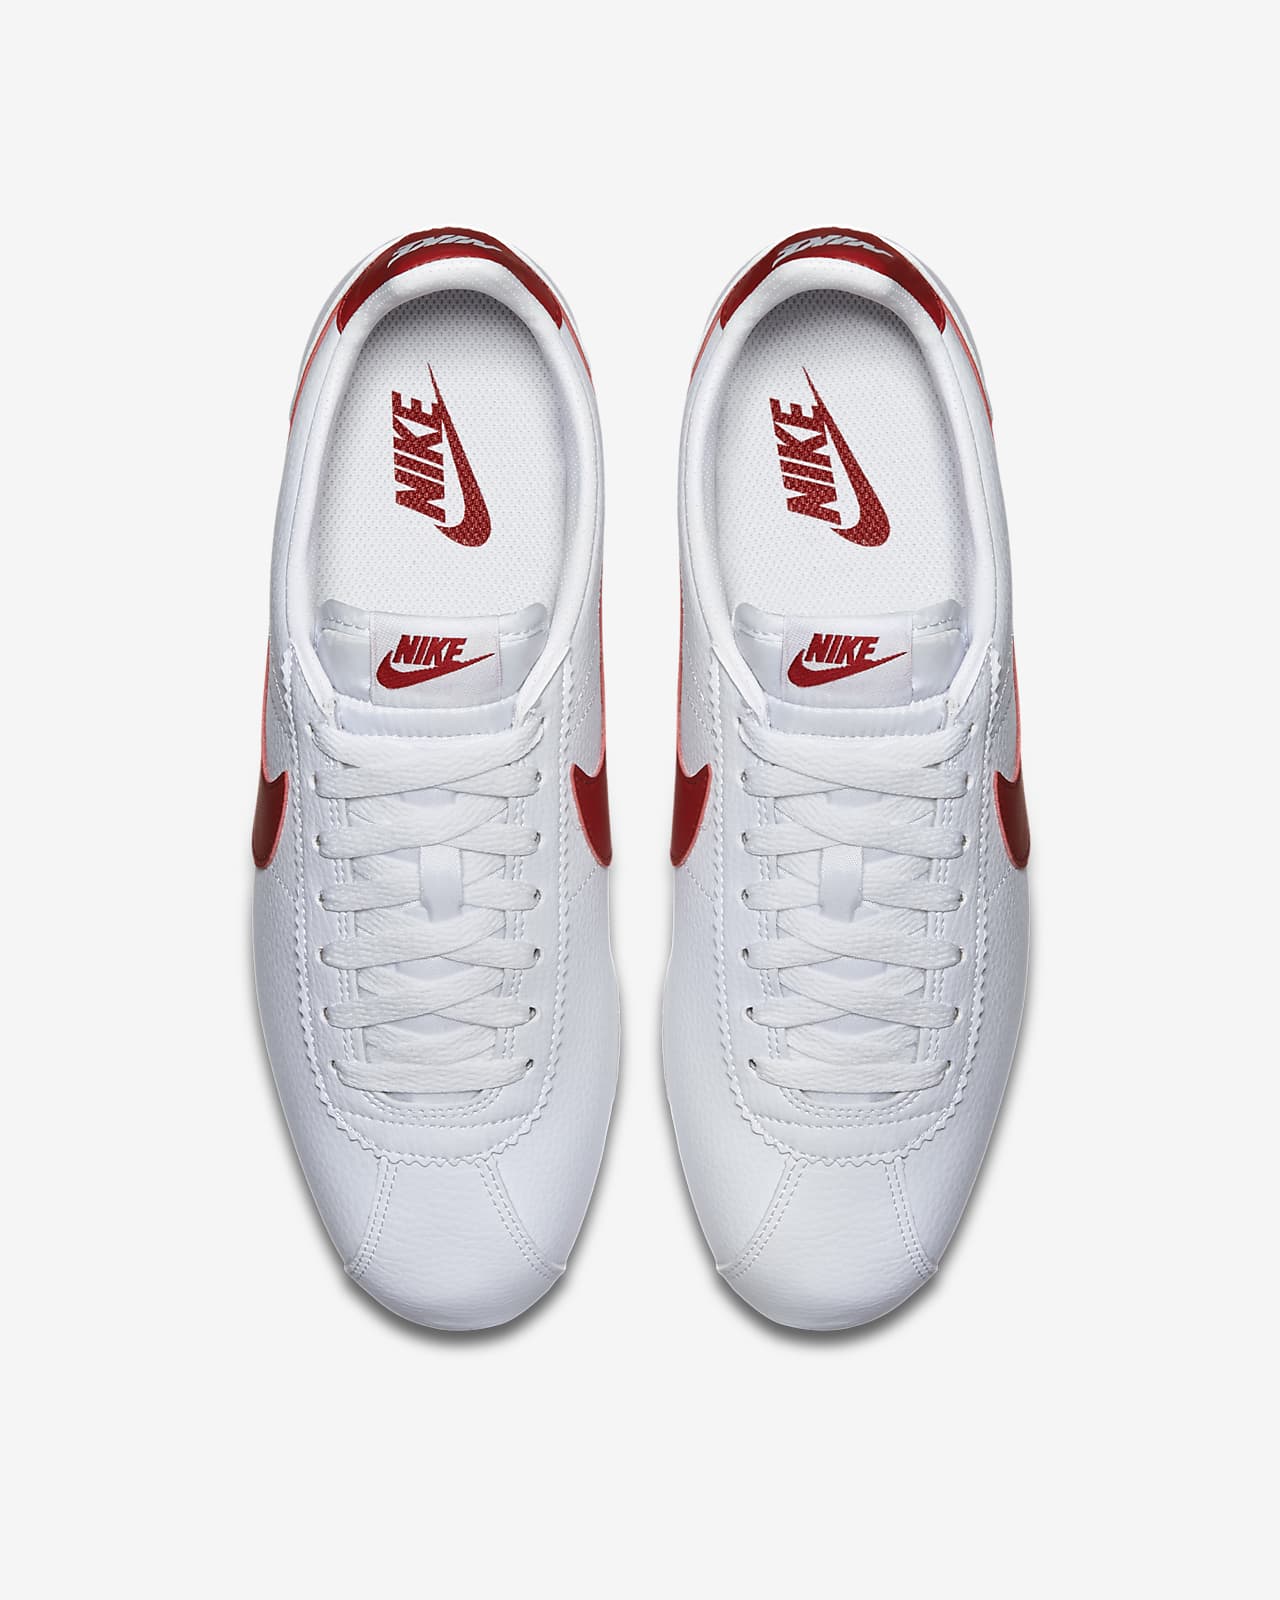 nike classic cortez leather mens trainers